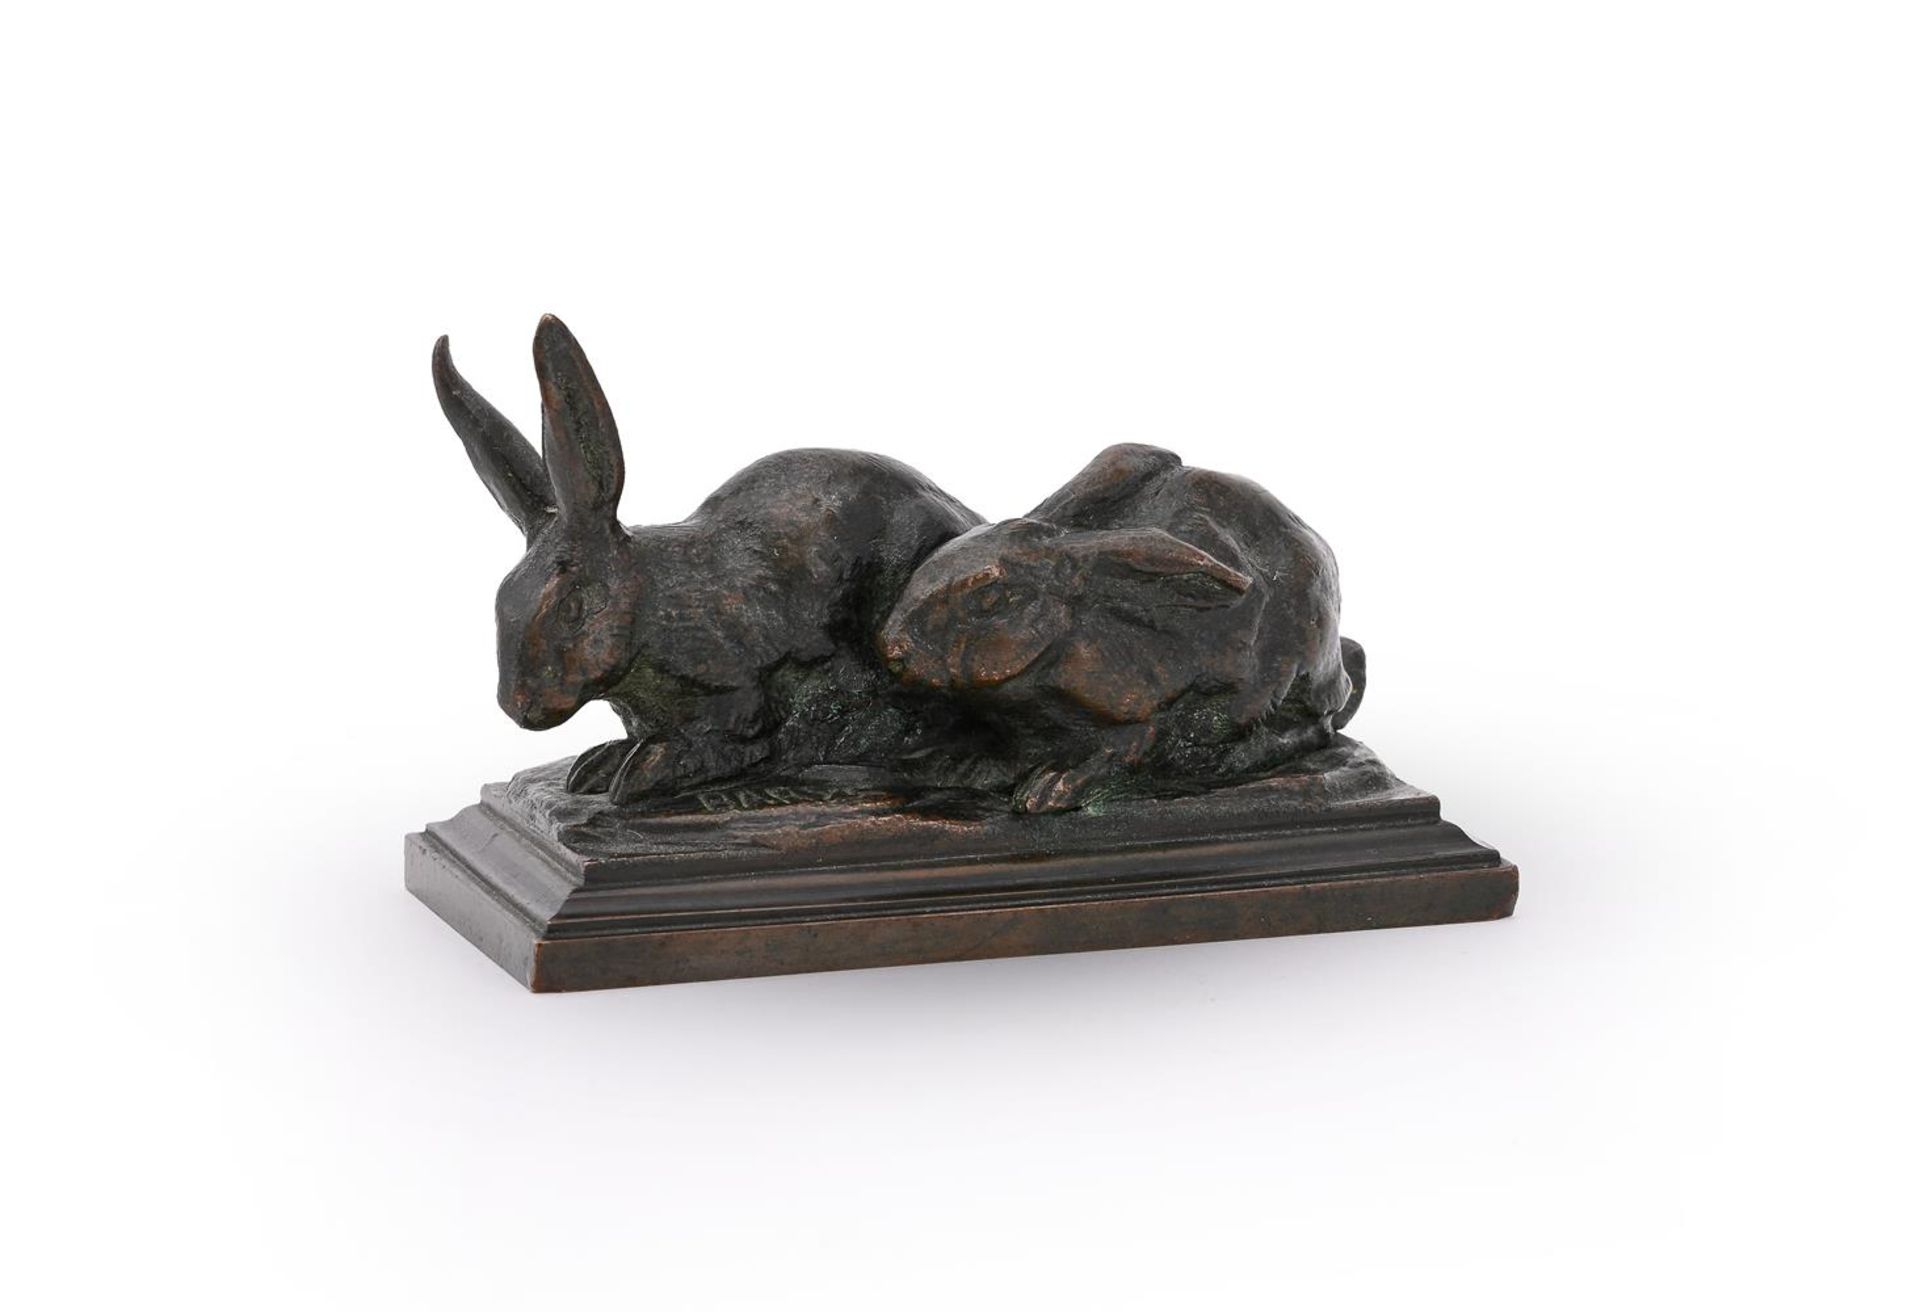 ANTOINE-LOUIS BARYE (FRENCH, 1795-1875), A BRONZE GROUP OF A PAIR OF RABBITS - Image 2 of 5